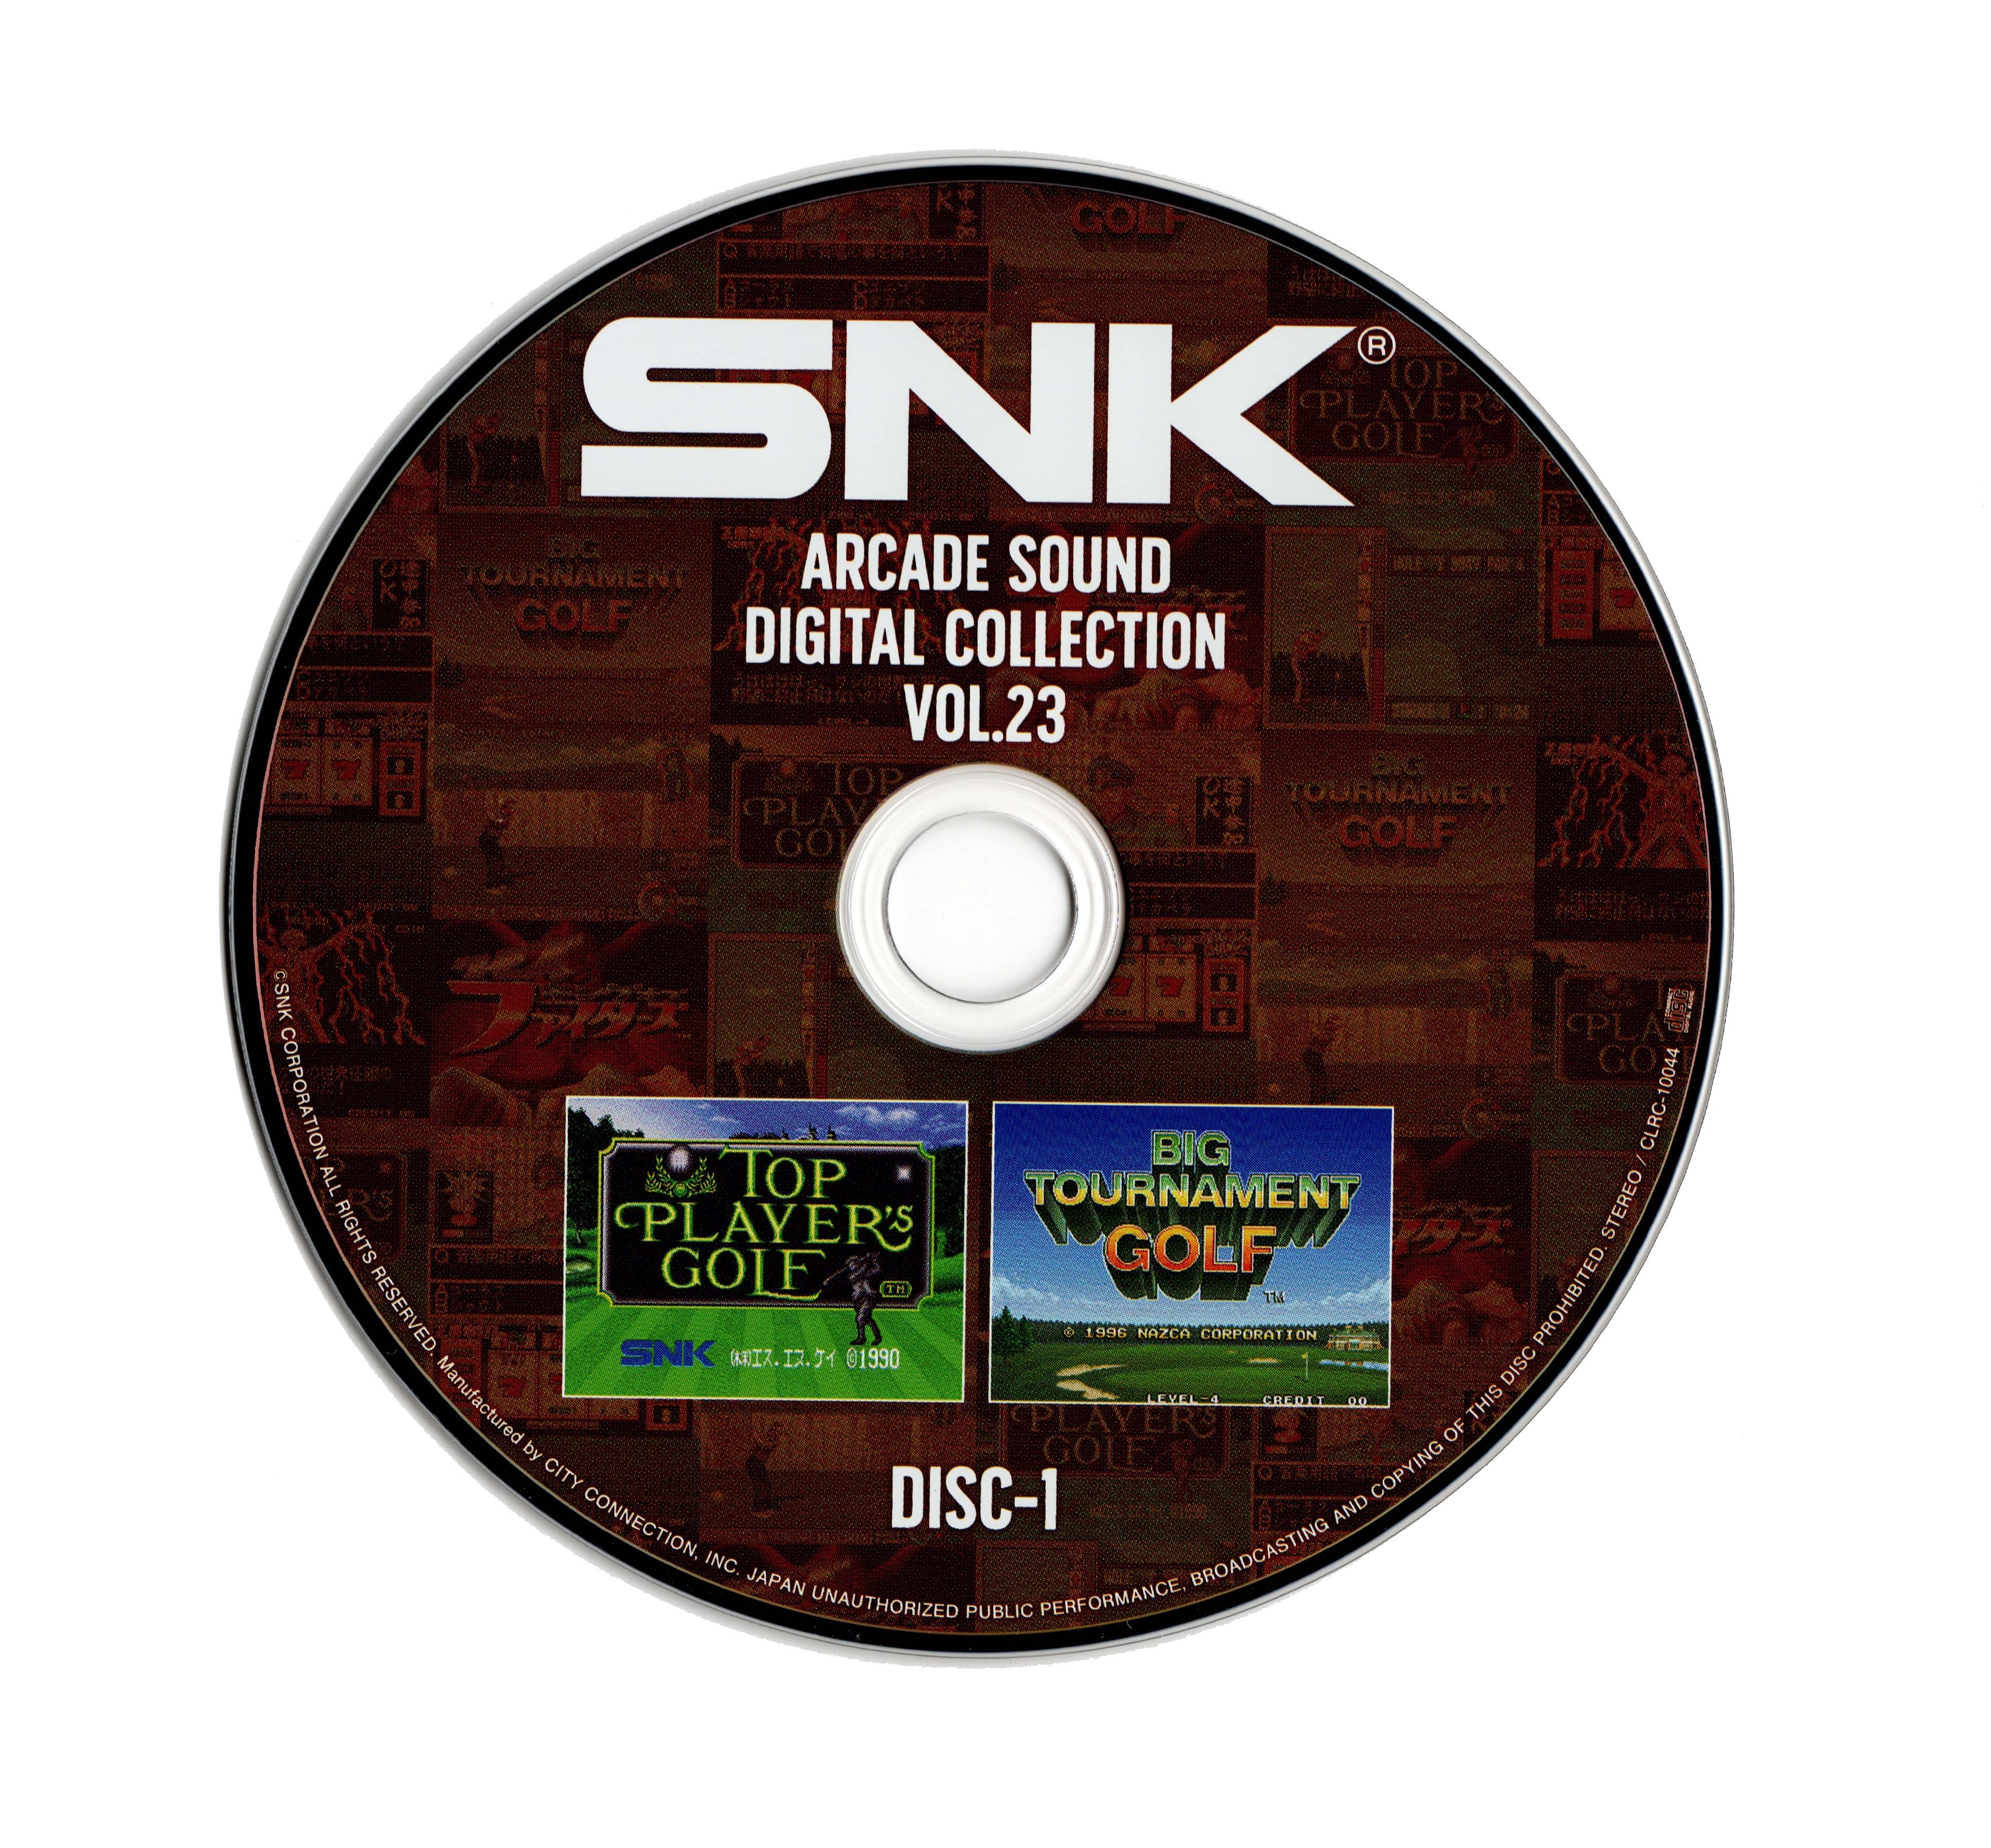 SNK ARCADE SOUND DIGITAL COLLECTION VOL.23 (2021) MP3 - Download SNK ARCADE  SOUND DIGITAL COLLECTION VOL.23 (2021) Soundtracks for FREE!